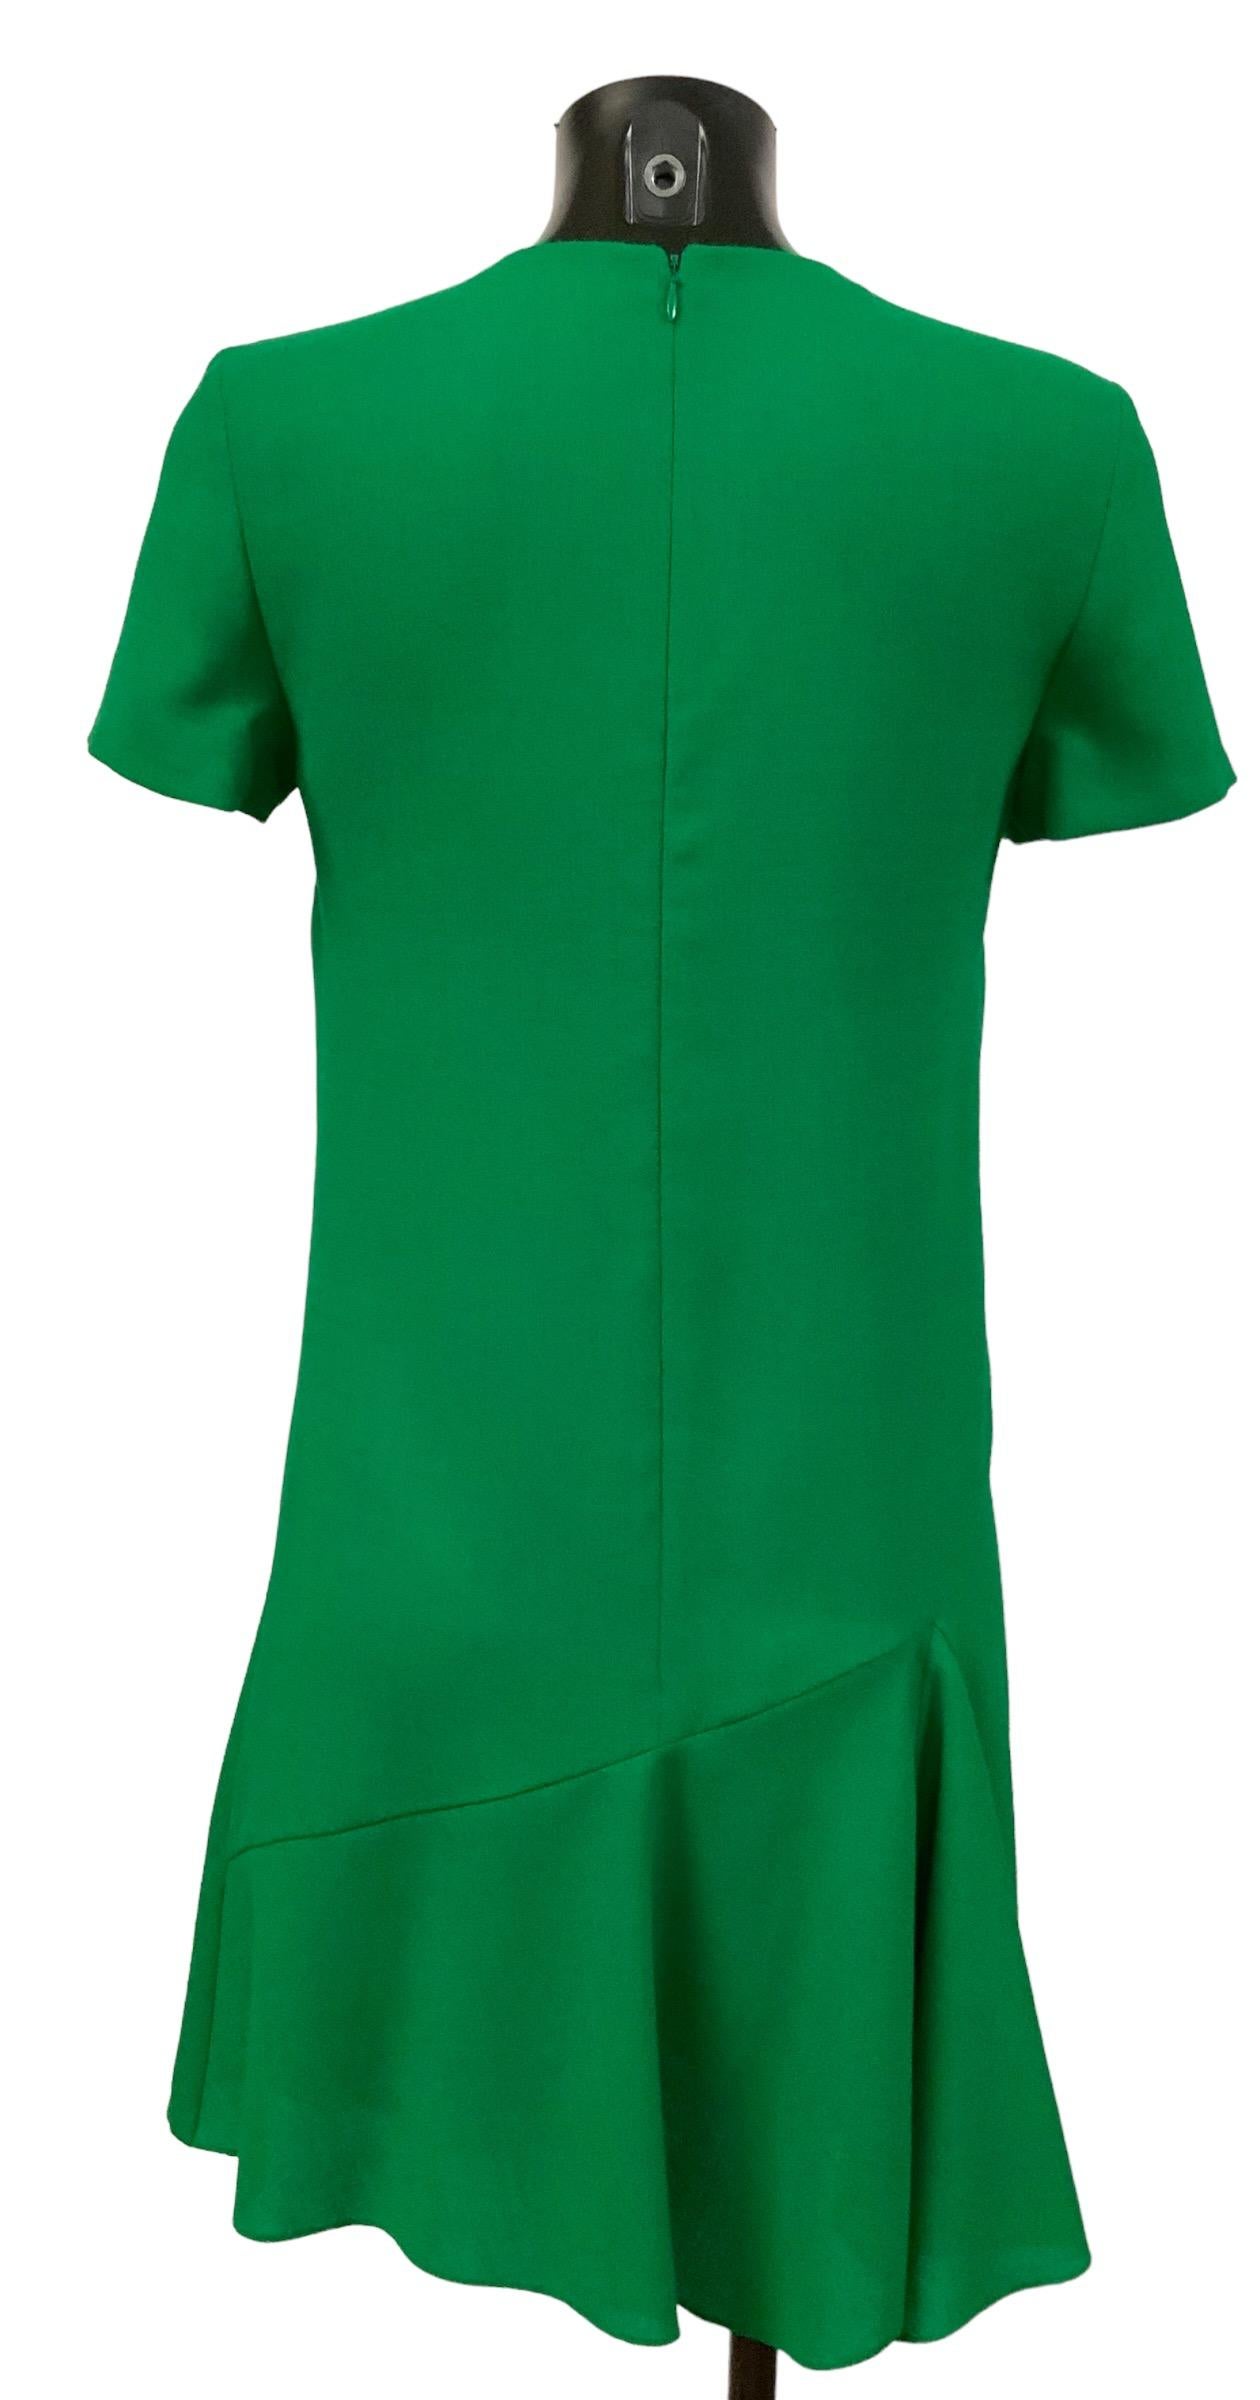 Stunning in its simplicity Chrsitian Dior fit and flare dress with flounces at side. 
It features a hidden back zipper.

Collection: 2000’s
Fabric: 100% wool
Lining: 100% silk
Color: Green
Size: FR 38 
Measurements: Full length: front: 86cm - back: